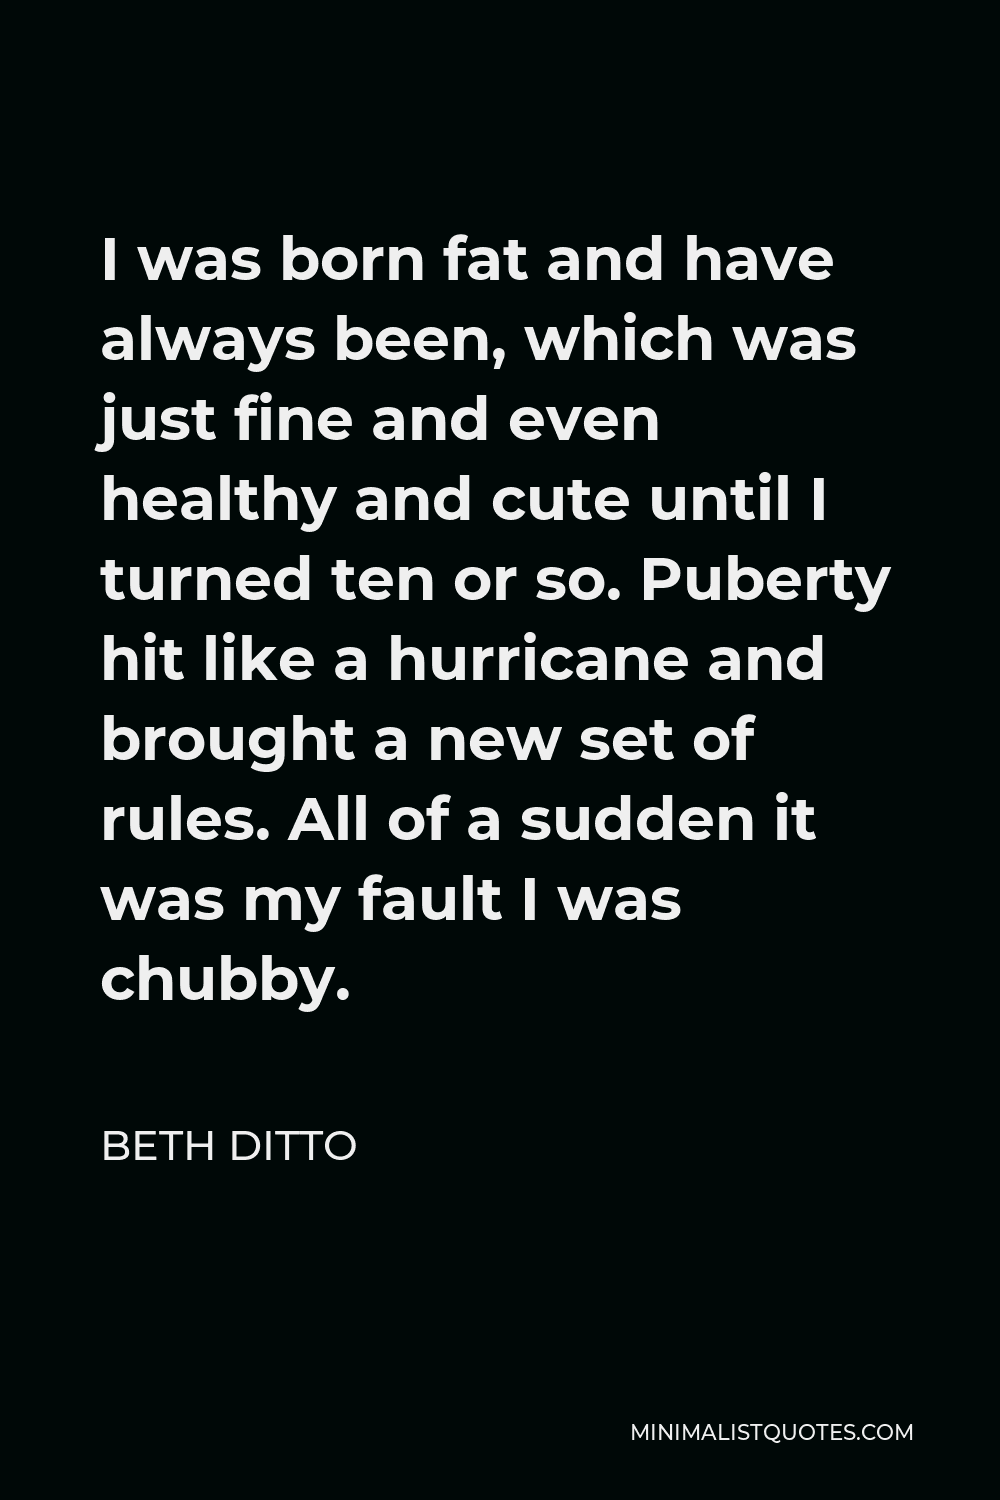 Beth Ditto Quote - I was born fat and have always been, which was just fine and even healthy and cute until I turned ten or so. Puberty hit like a hurricane and brought a new set of rules. All of a sudden it was my fault I was chubby.